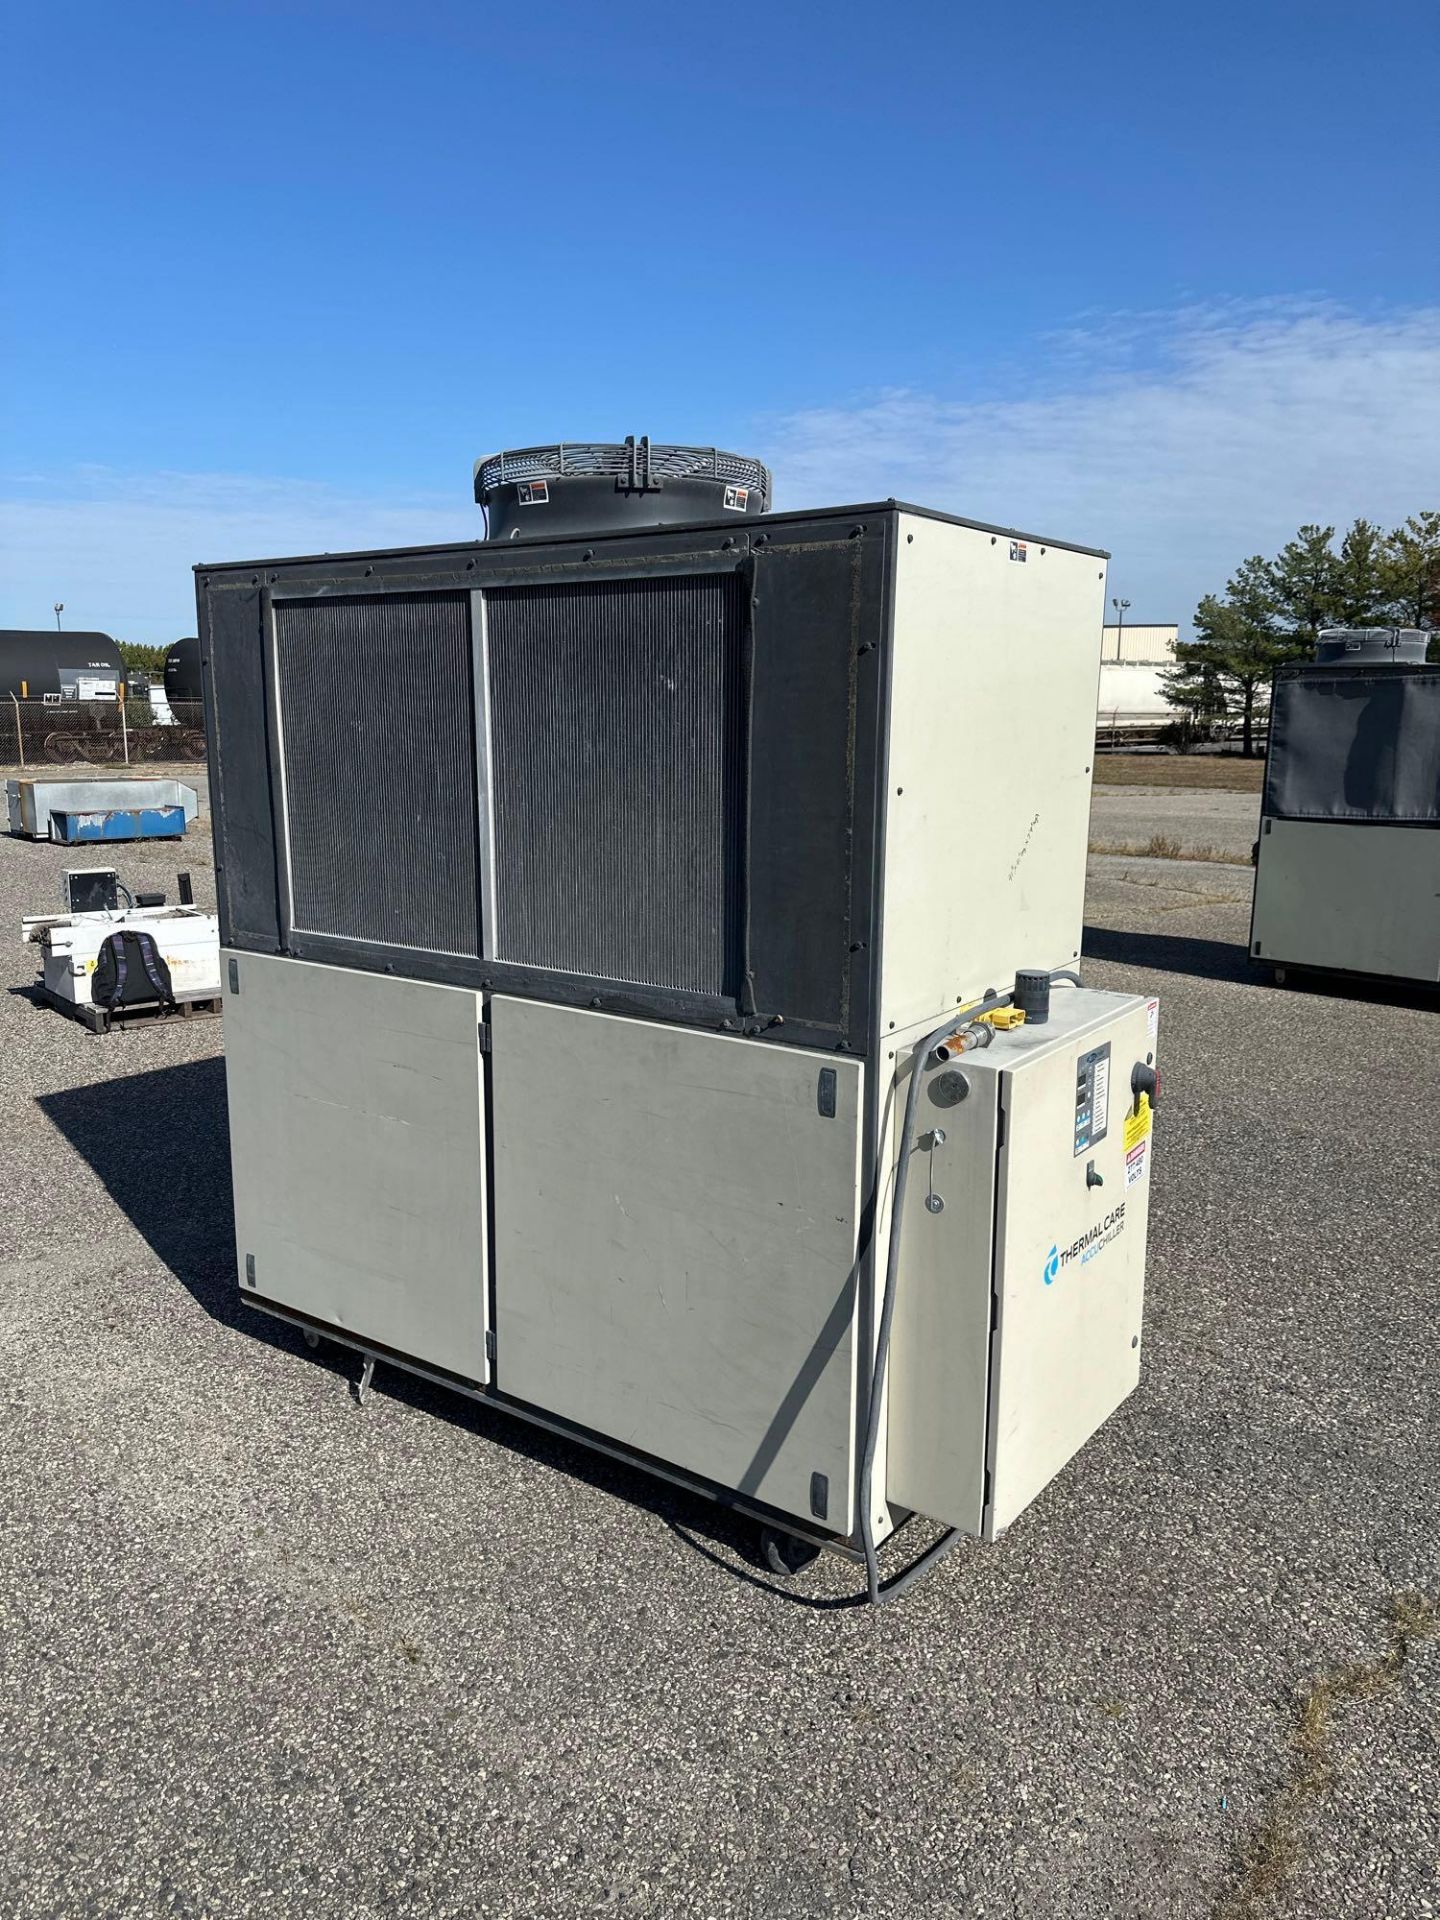 THERMAL CARE NQA15 ACCUCHILLER - Image 6 of 7